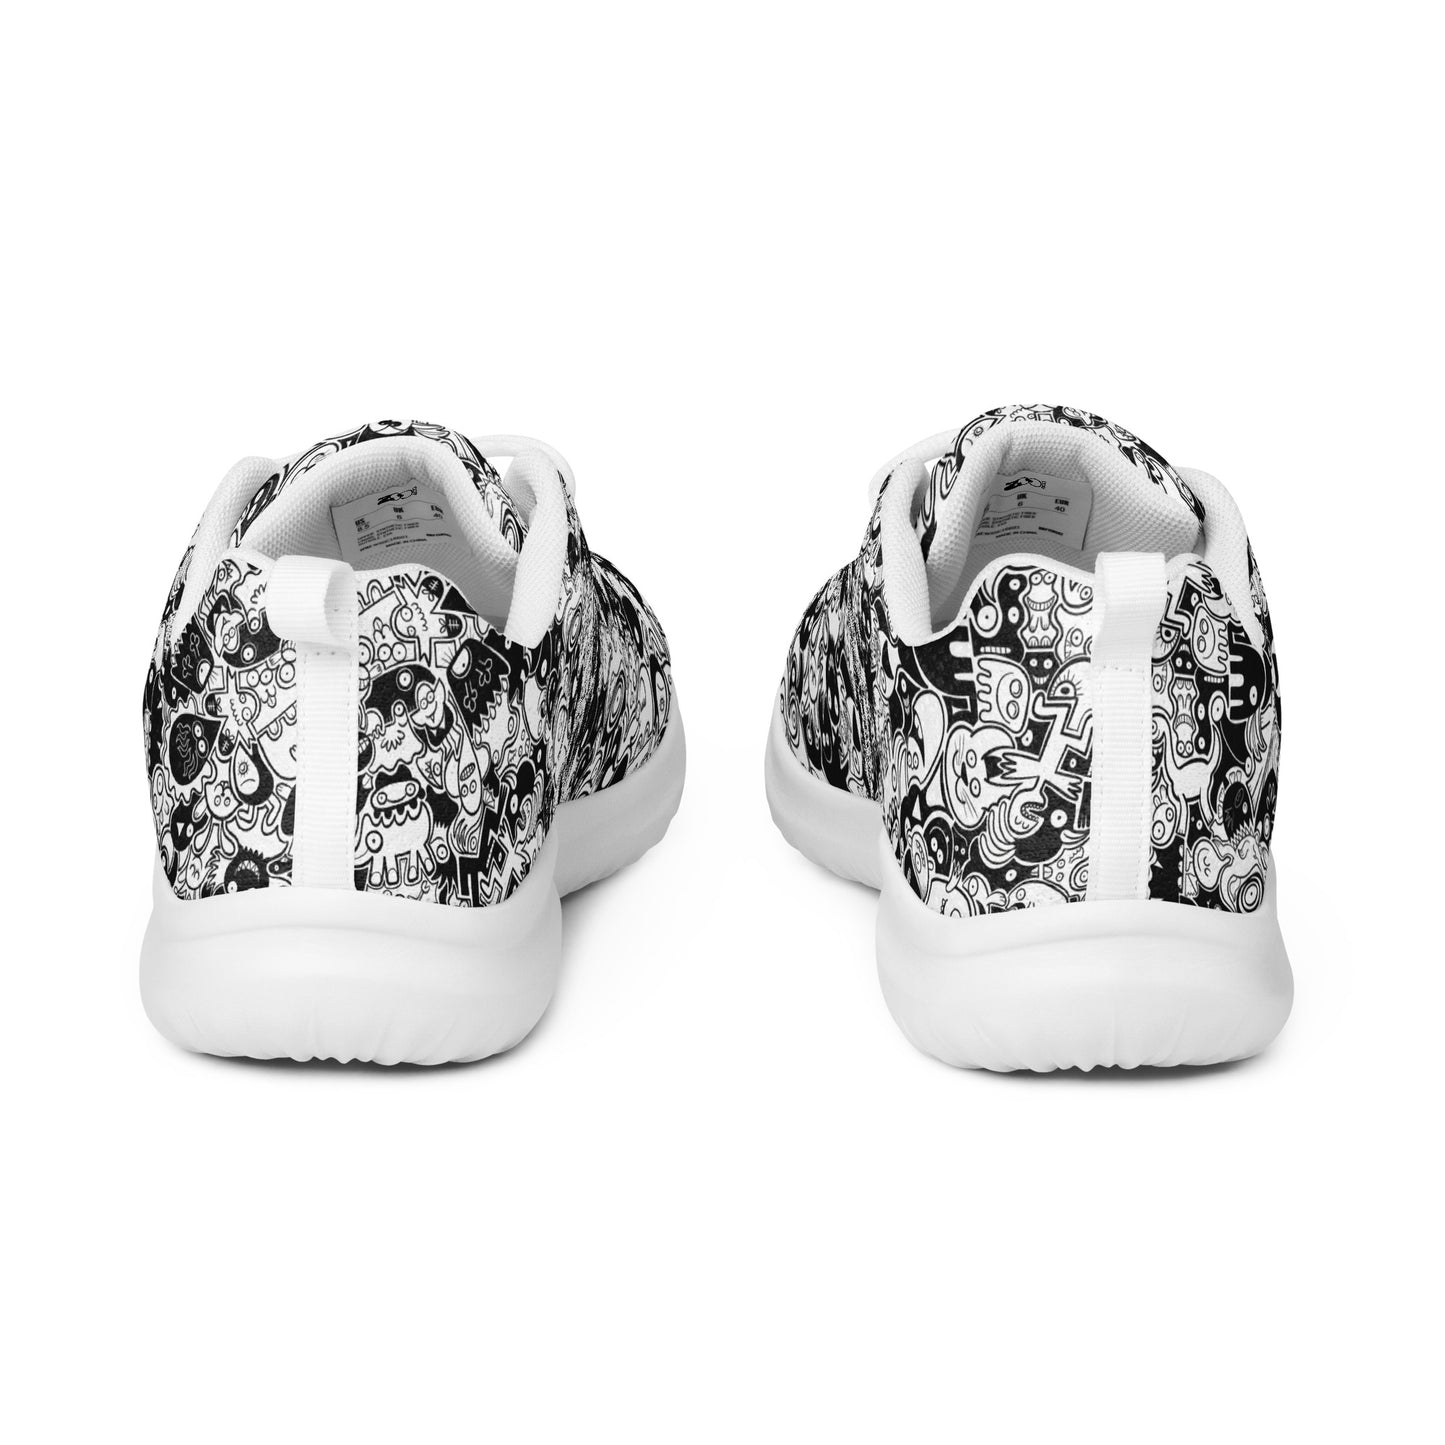 Joyful crowd of black and white doodle creatures Women’s athletic shoes. Back view